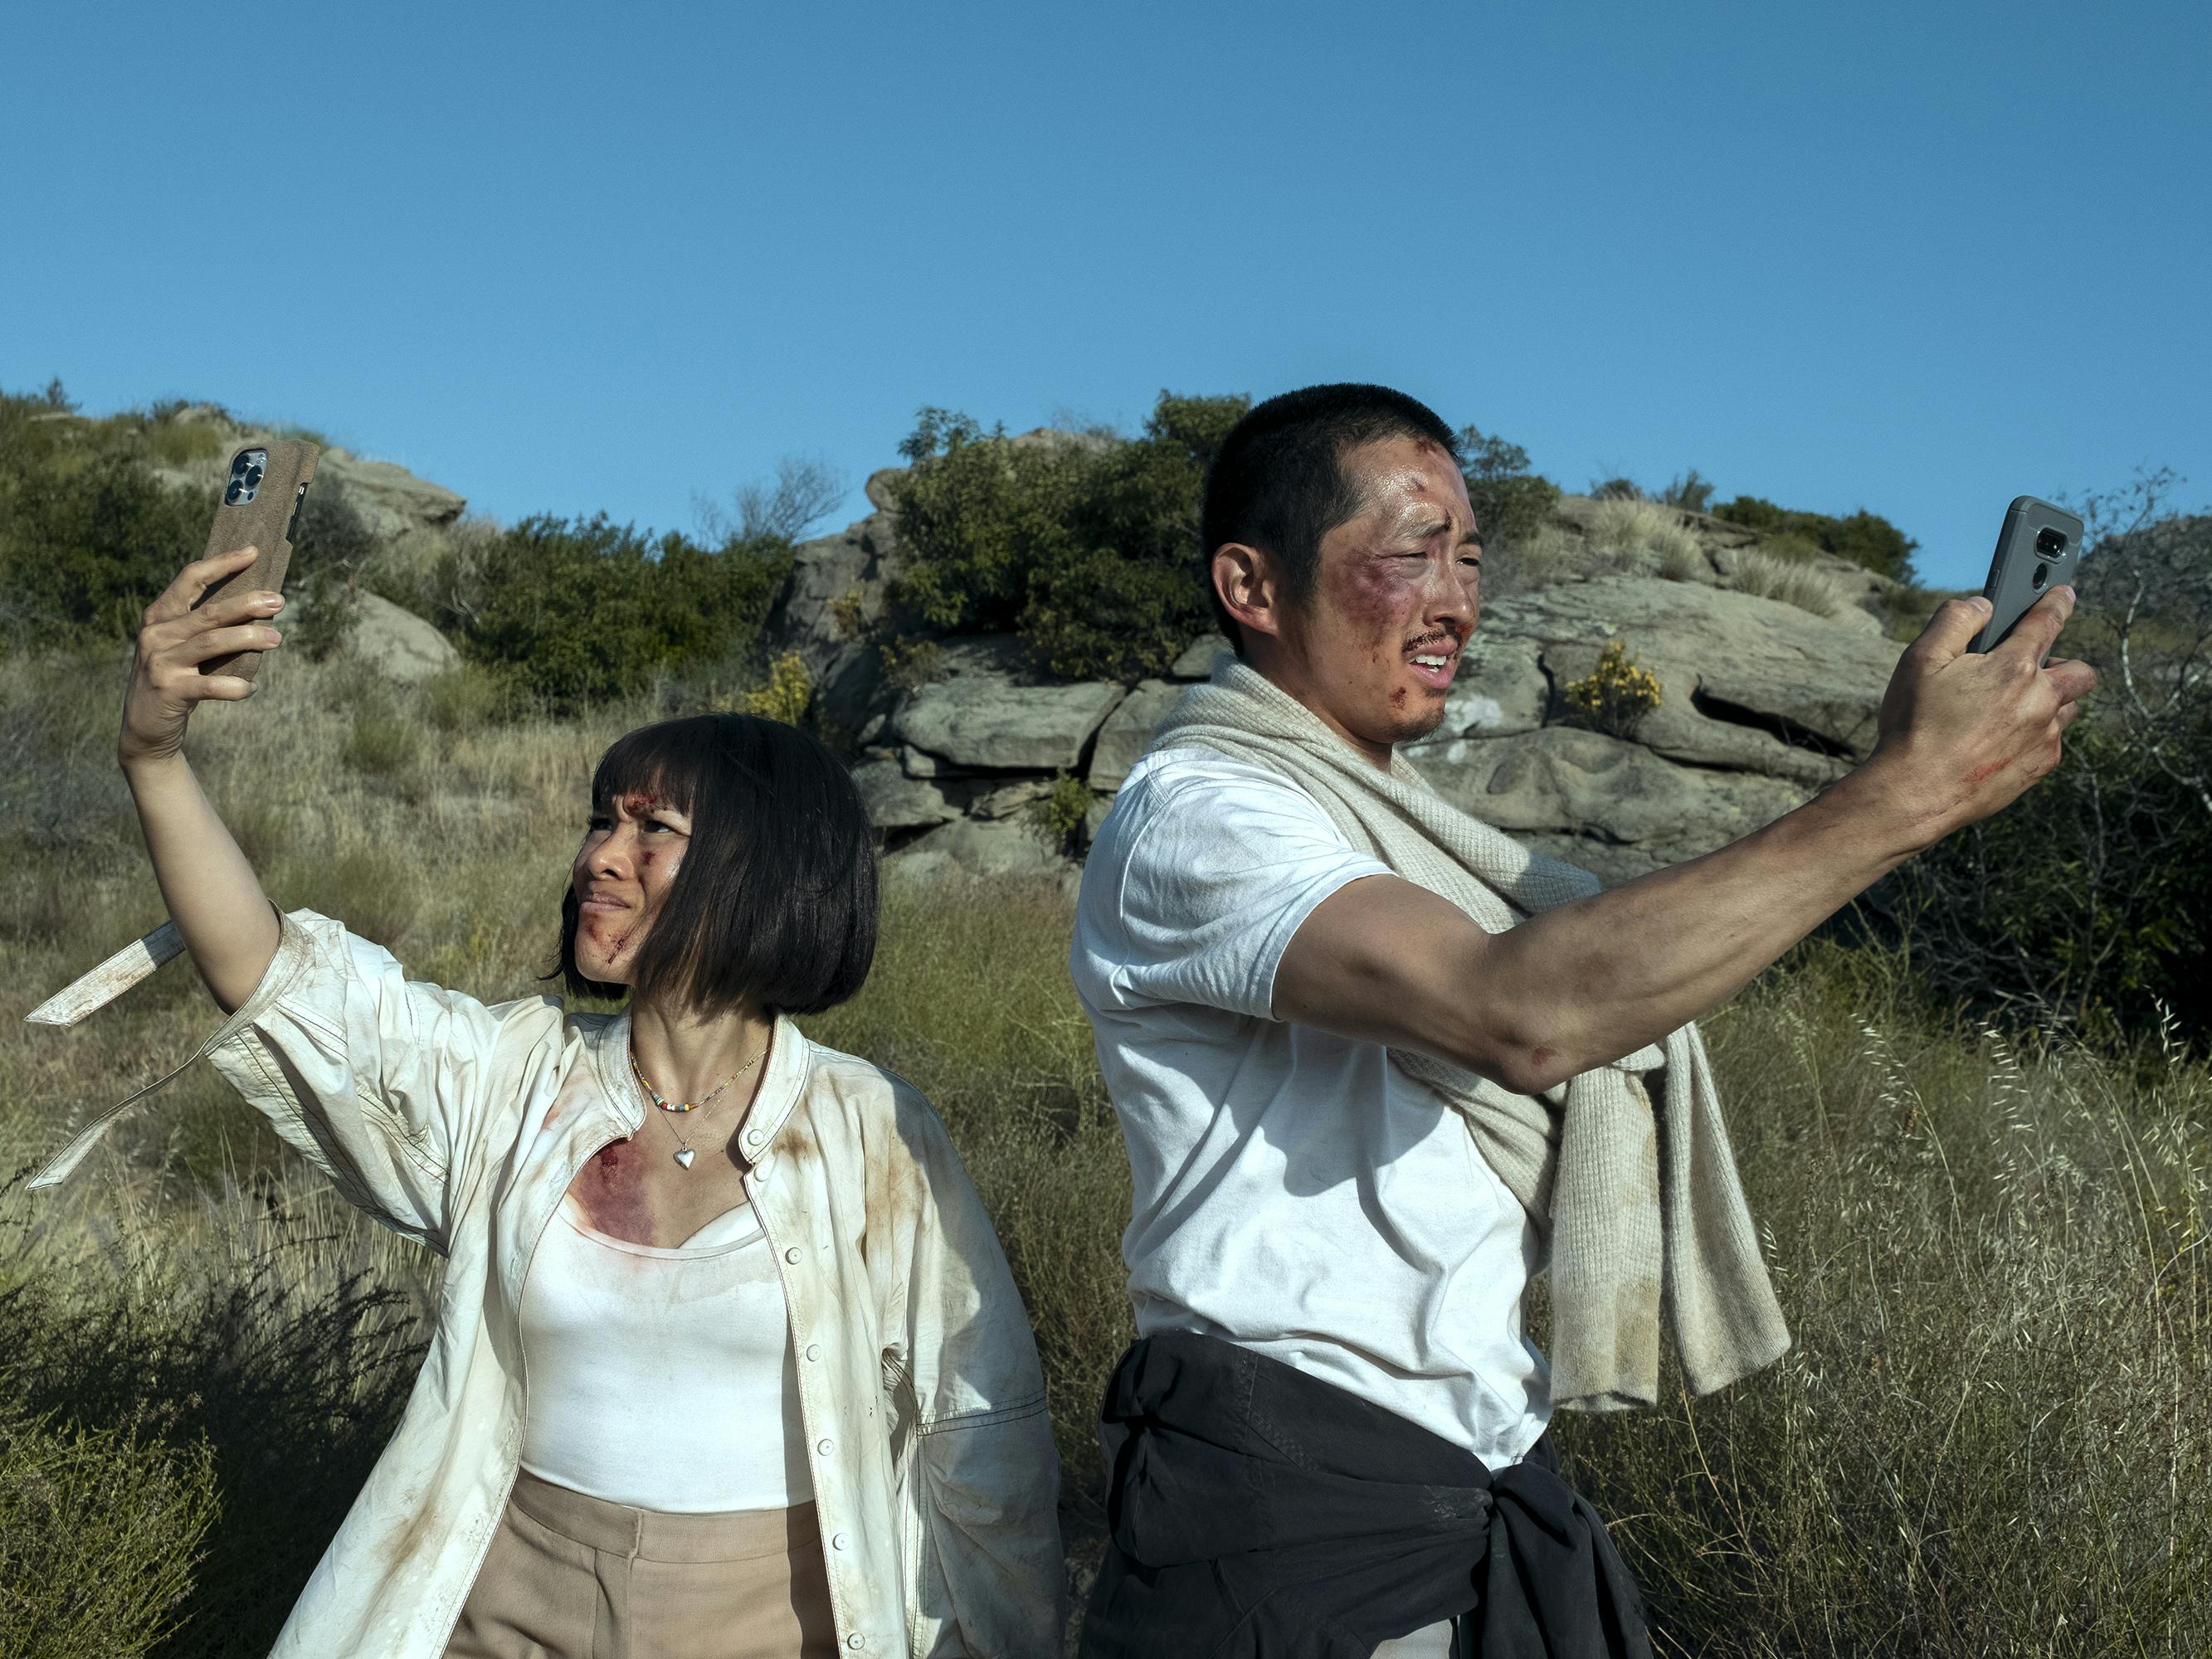 Amy Lau (Ali Wong) and Danny Cho (Steven Yeun) look disheveled and dirty in the middle of the desert, holding their phones up to a very blue sky.  